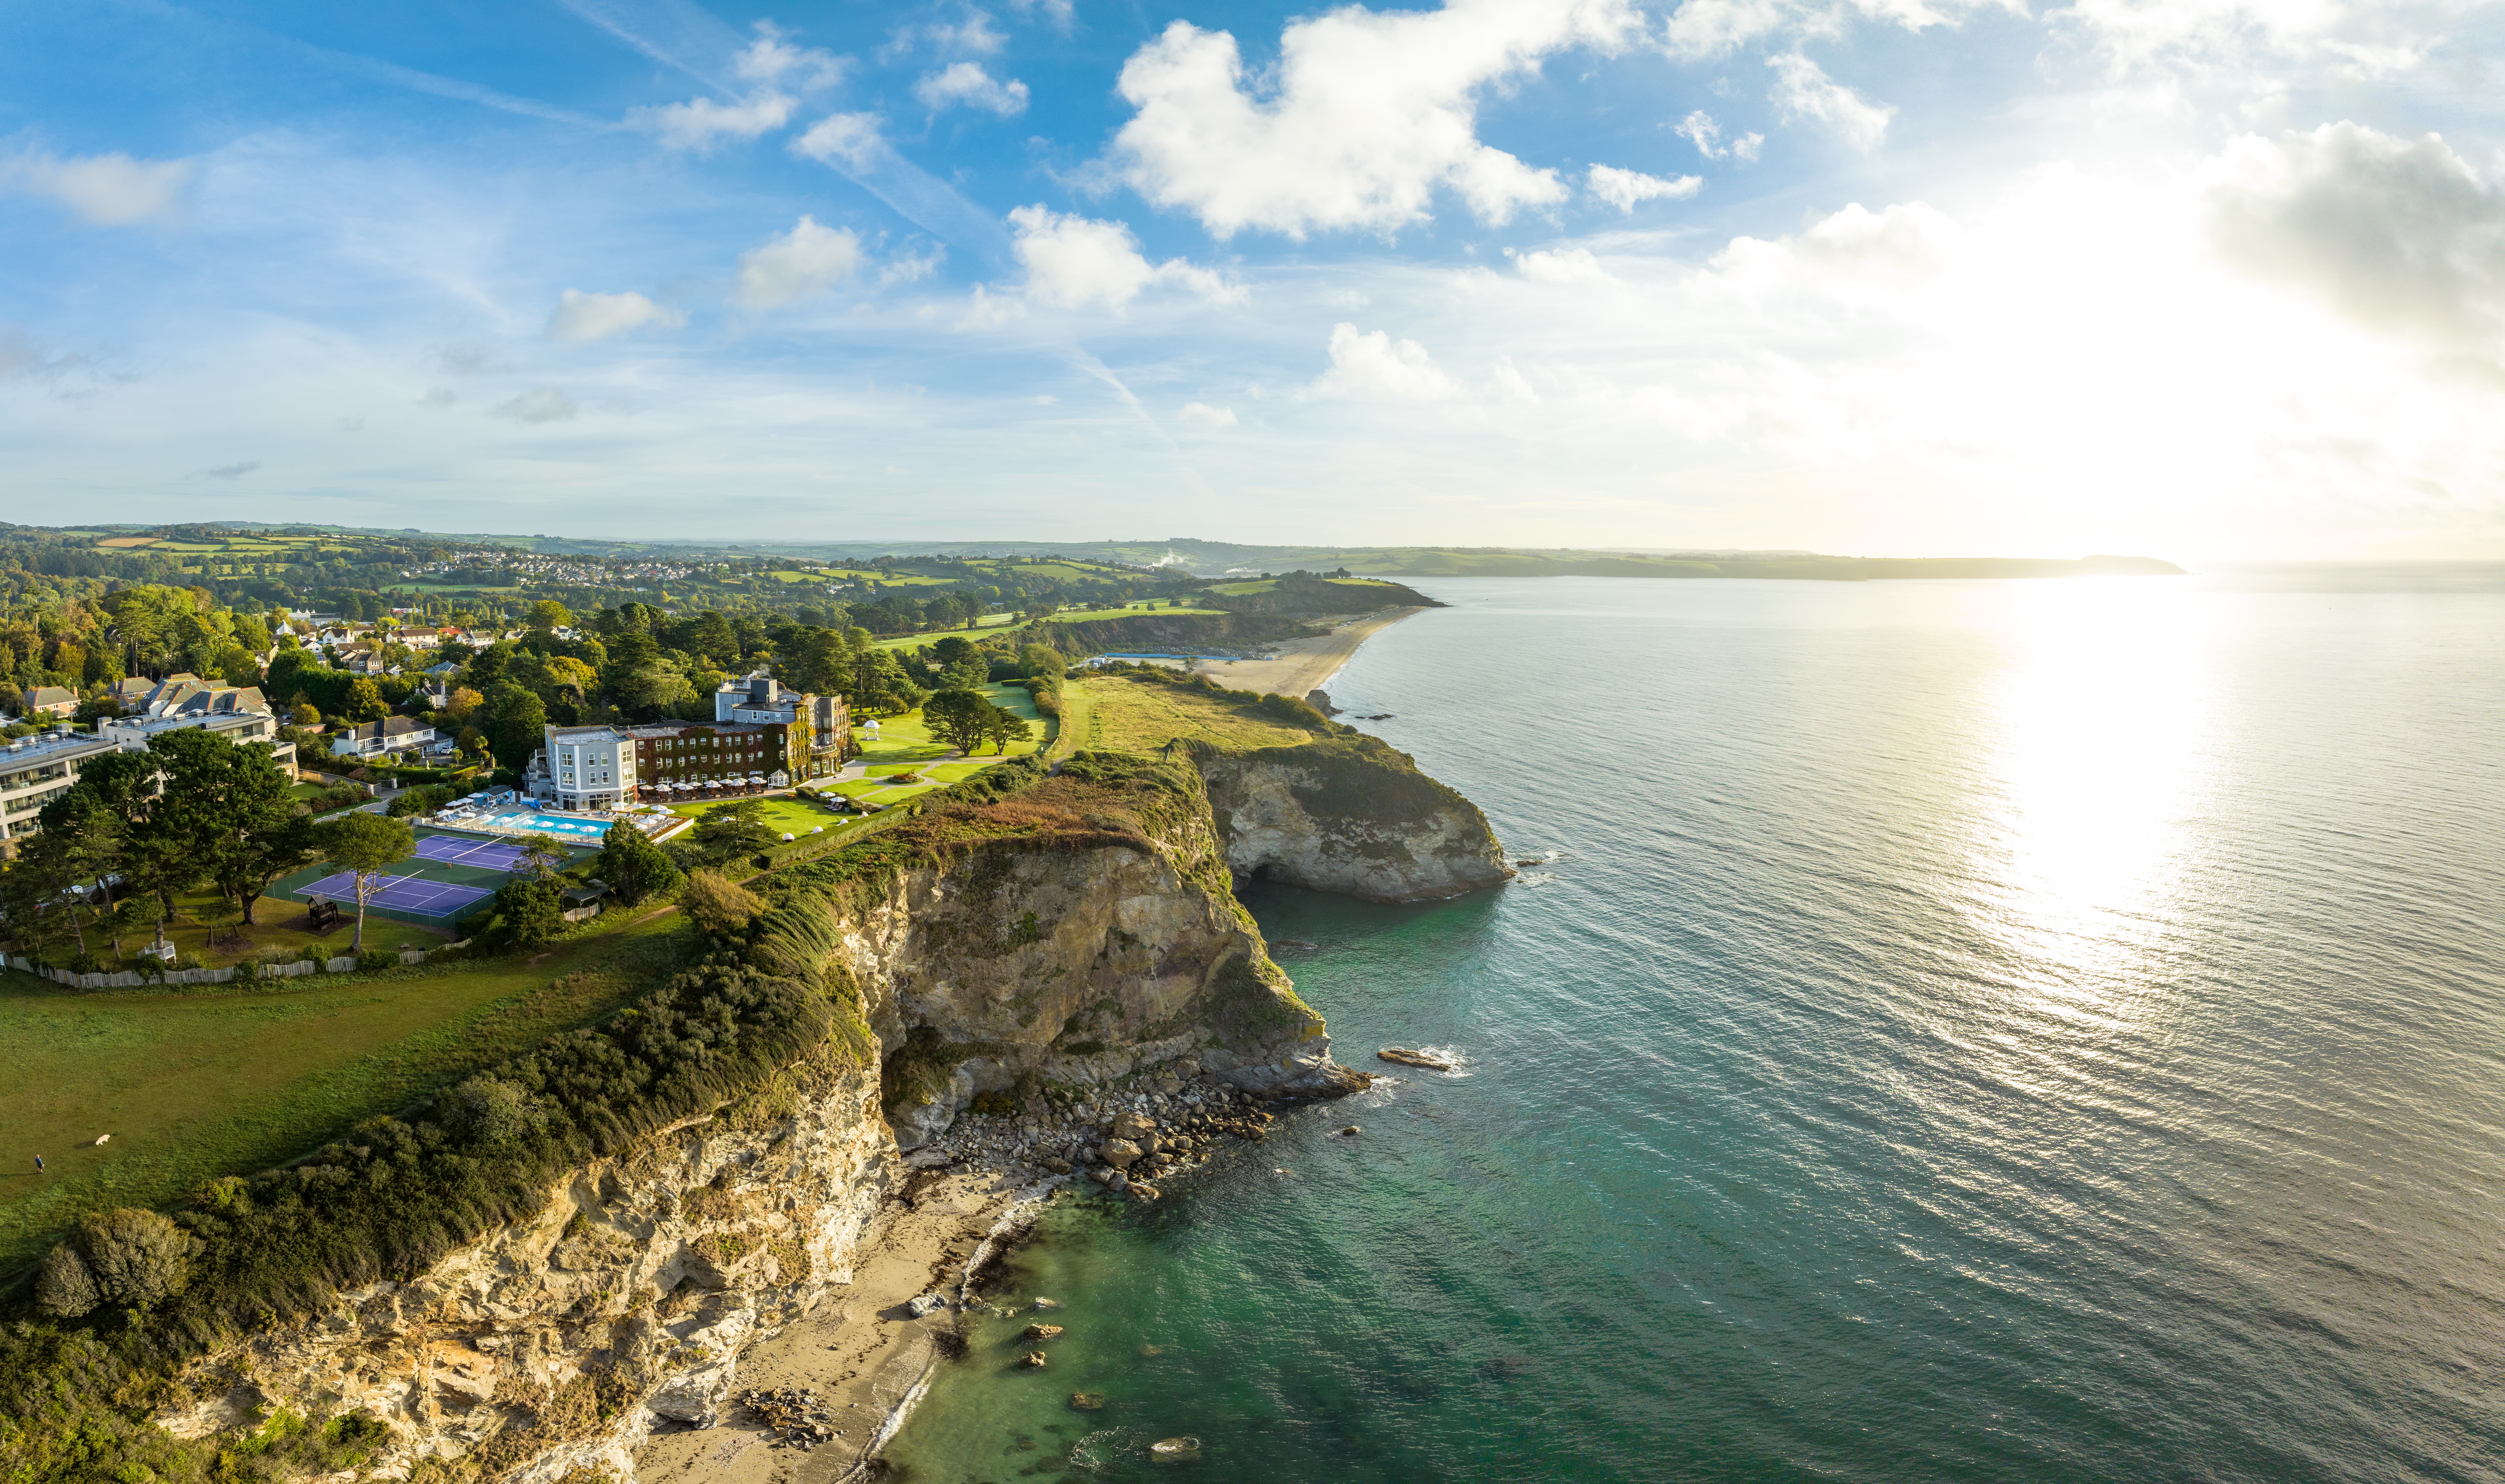 Aerial view of the Carlyon Hotel on the edge of a cliff overlooking the sea